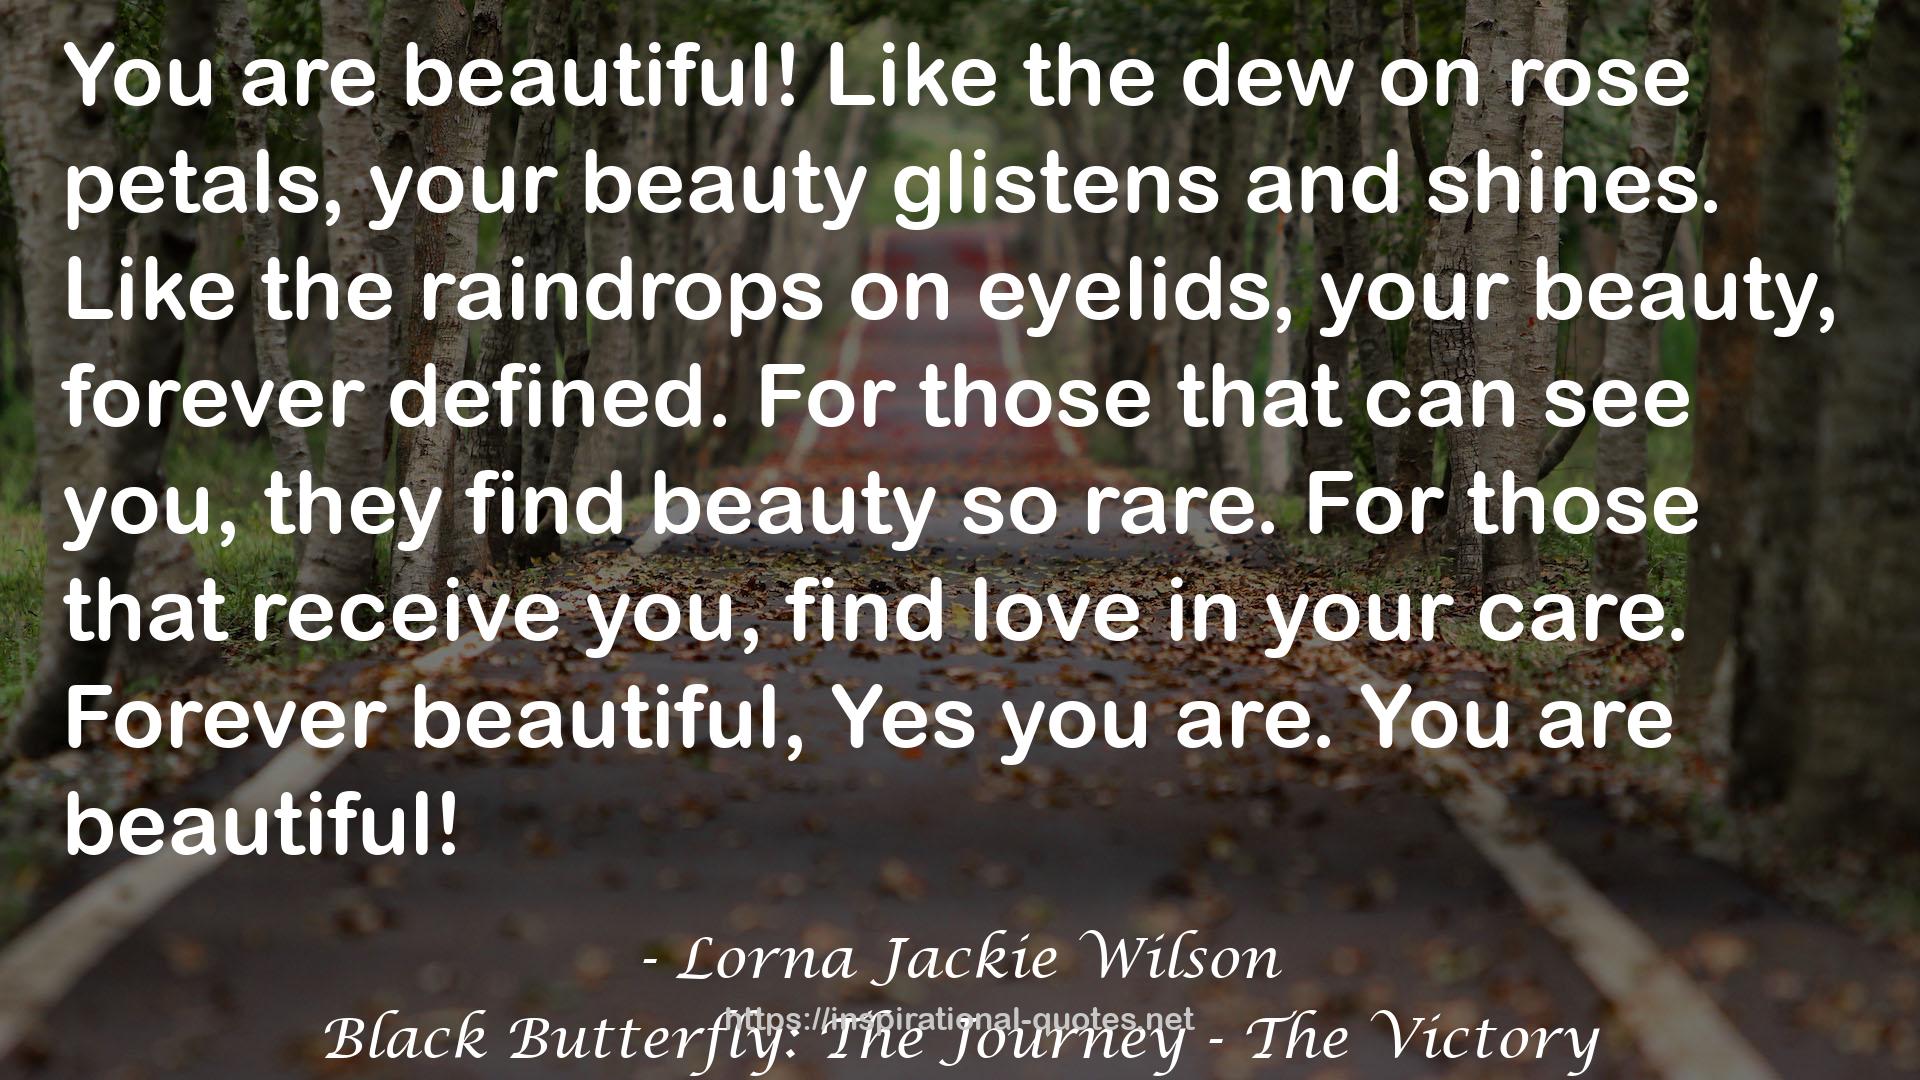 Black Butterfly: The Journey - The Victory QUOTES